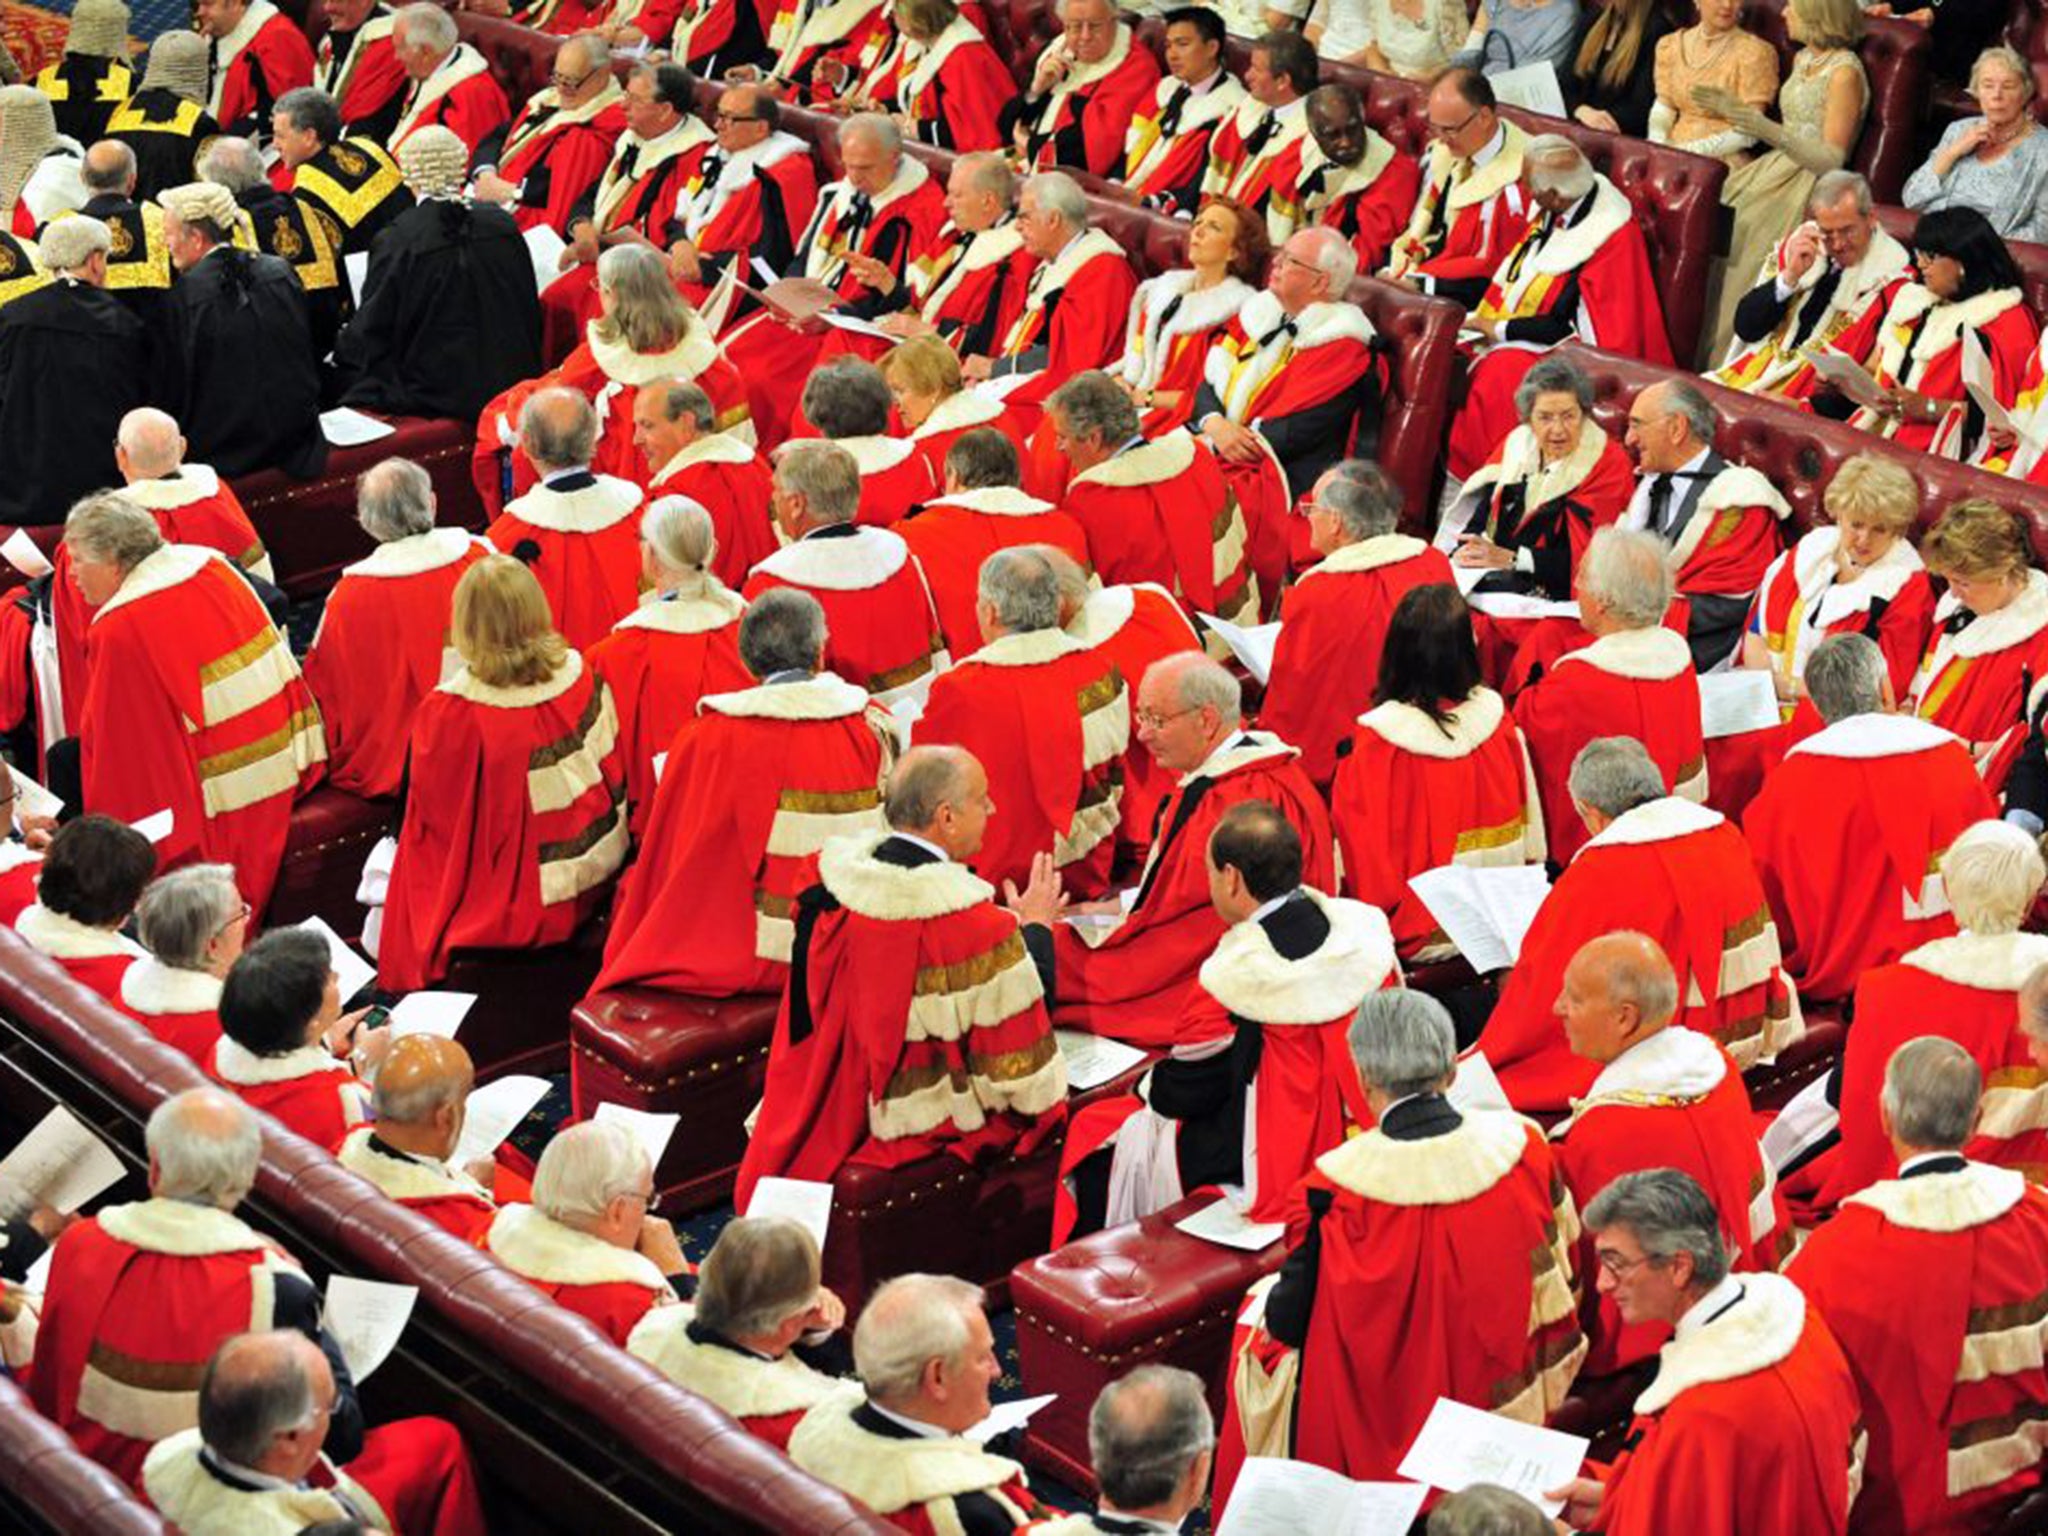 There are only 400 House of Lords seats, but more than 840 peers